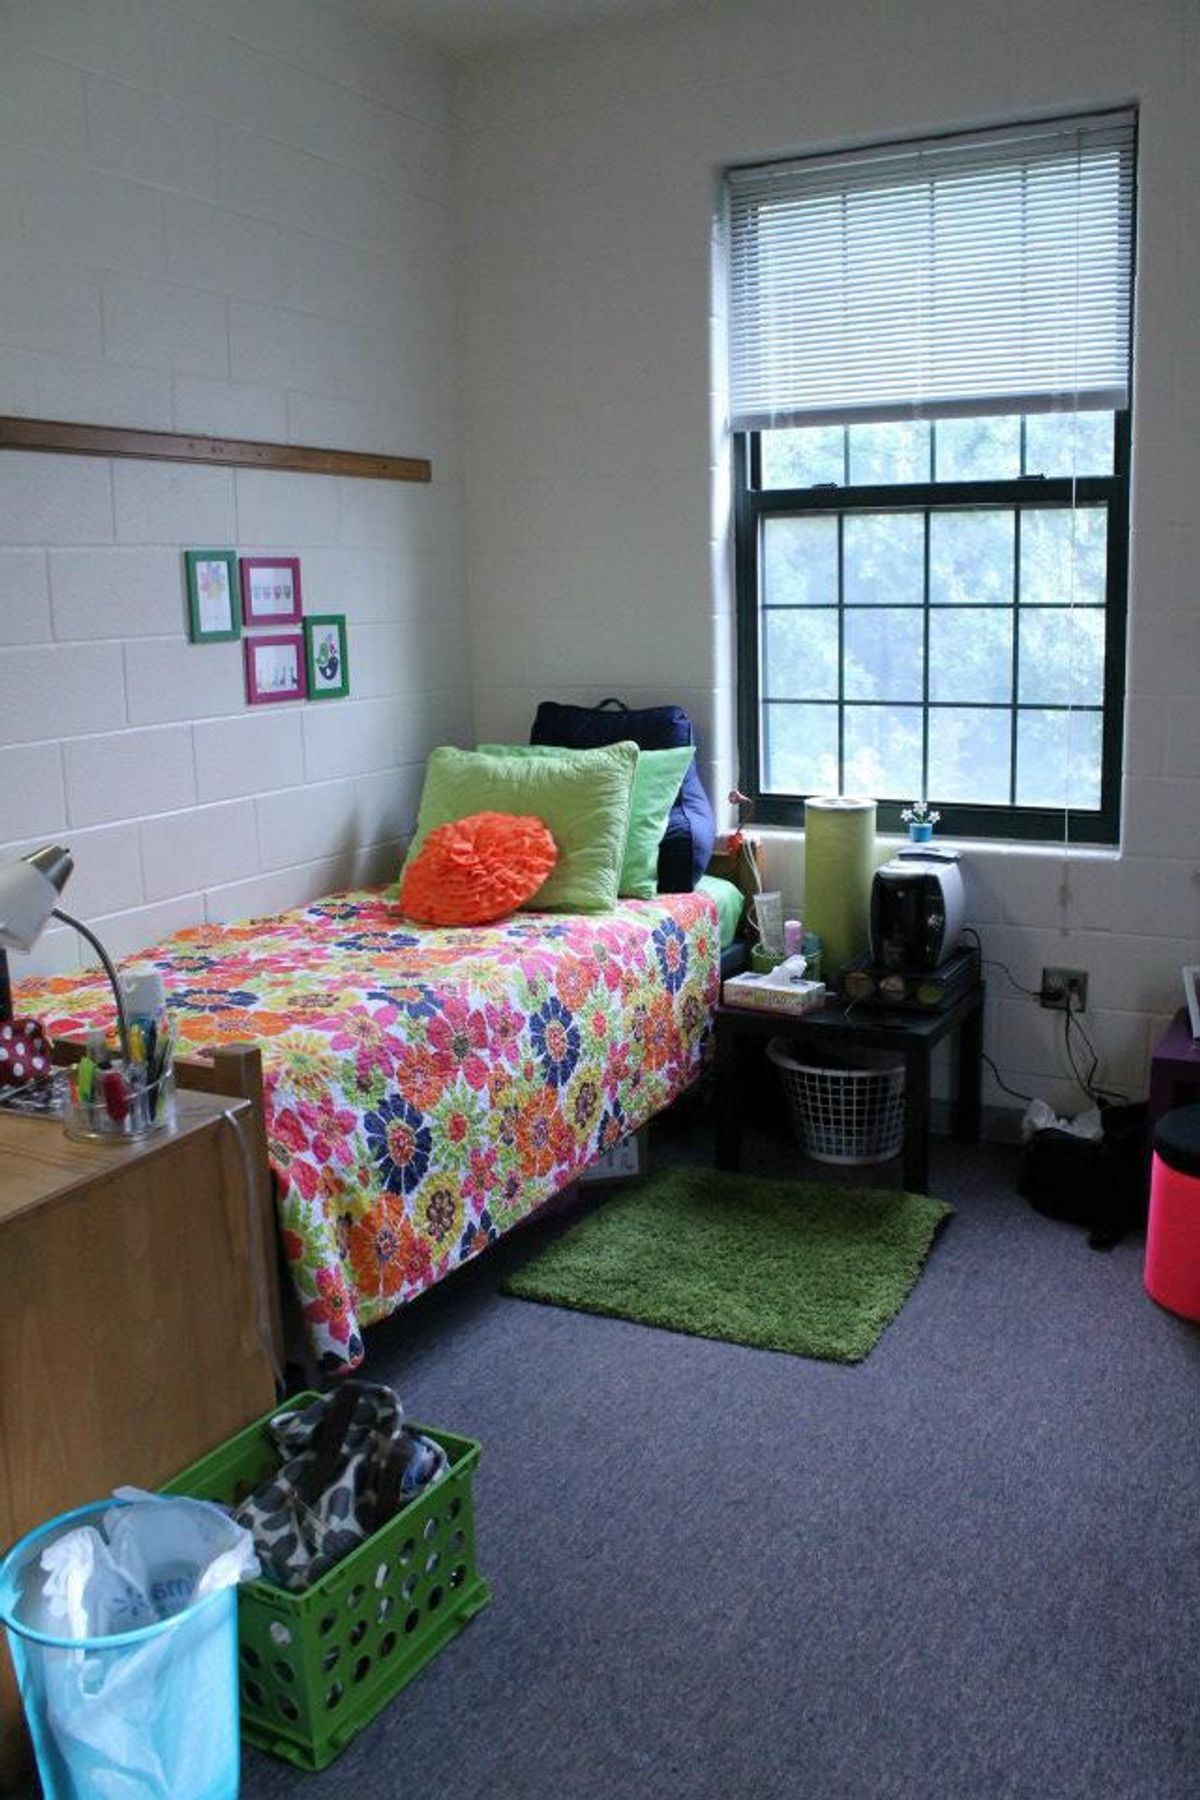 A Comprehensive Guide To Everything You Actually Need In College